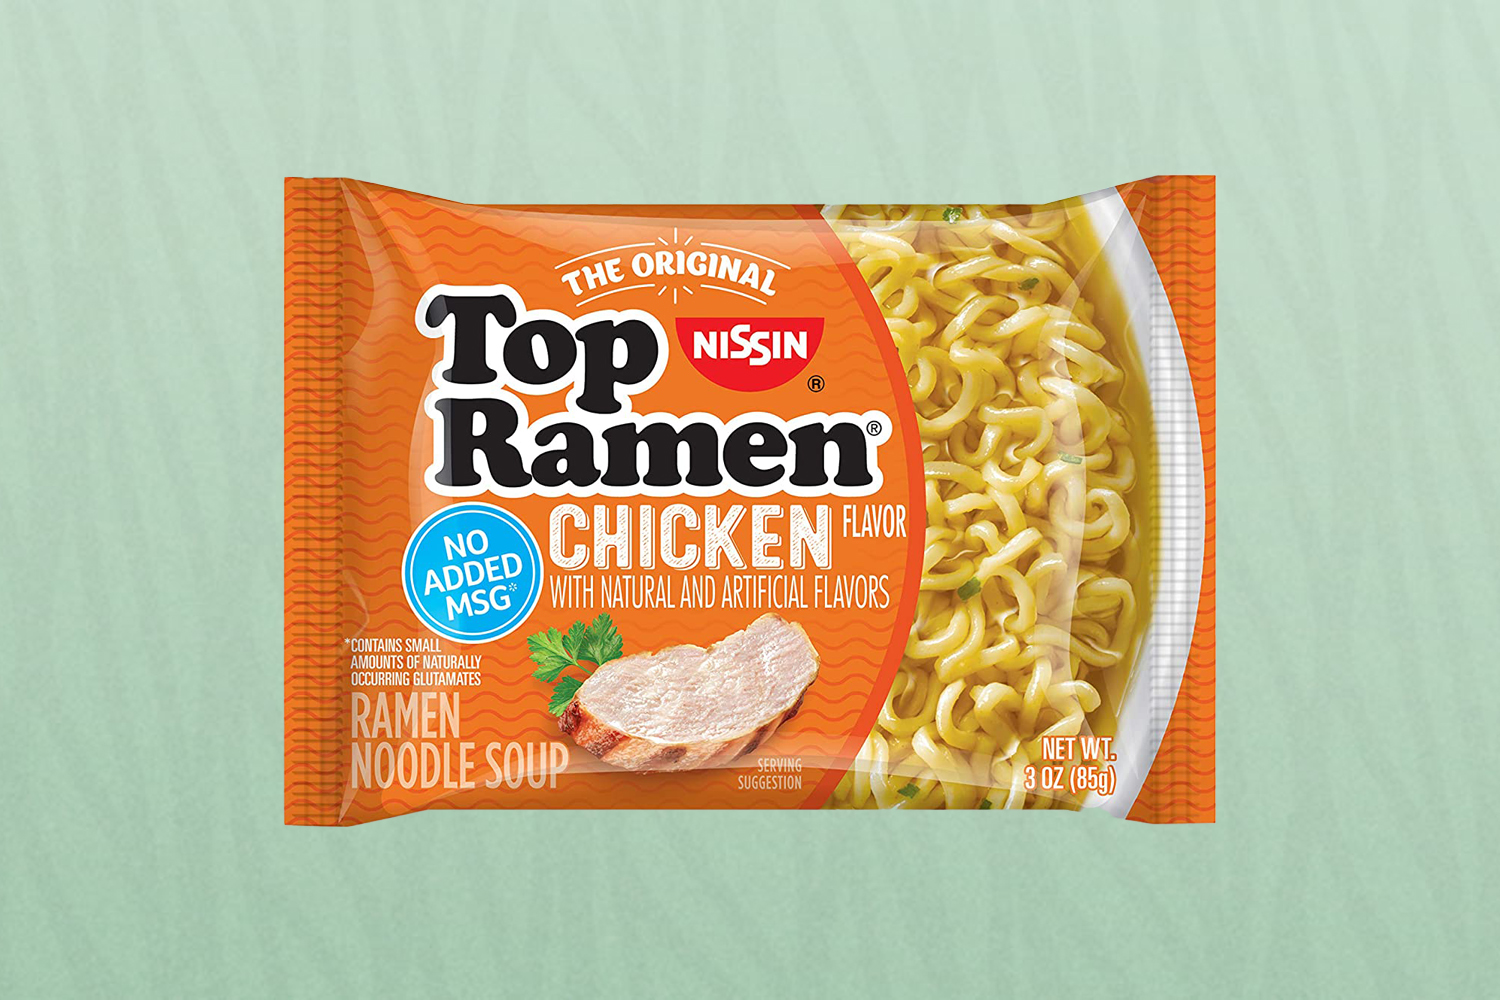 Ramen noodle soup is one of the best meals to eat while getting high in 2022